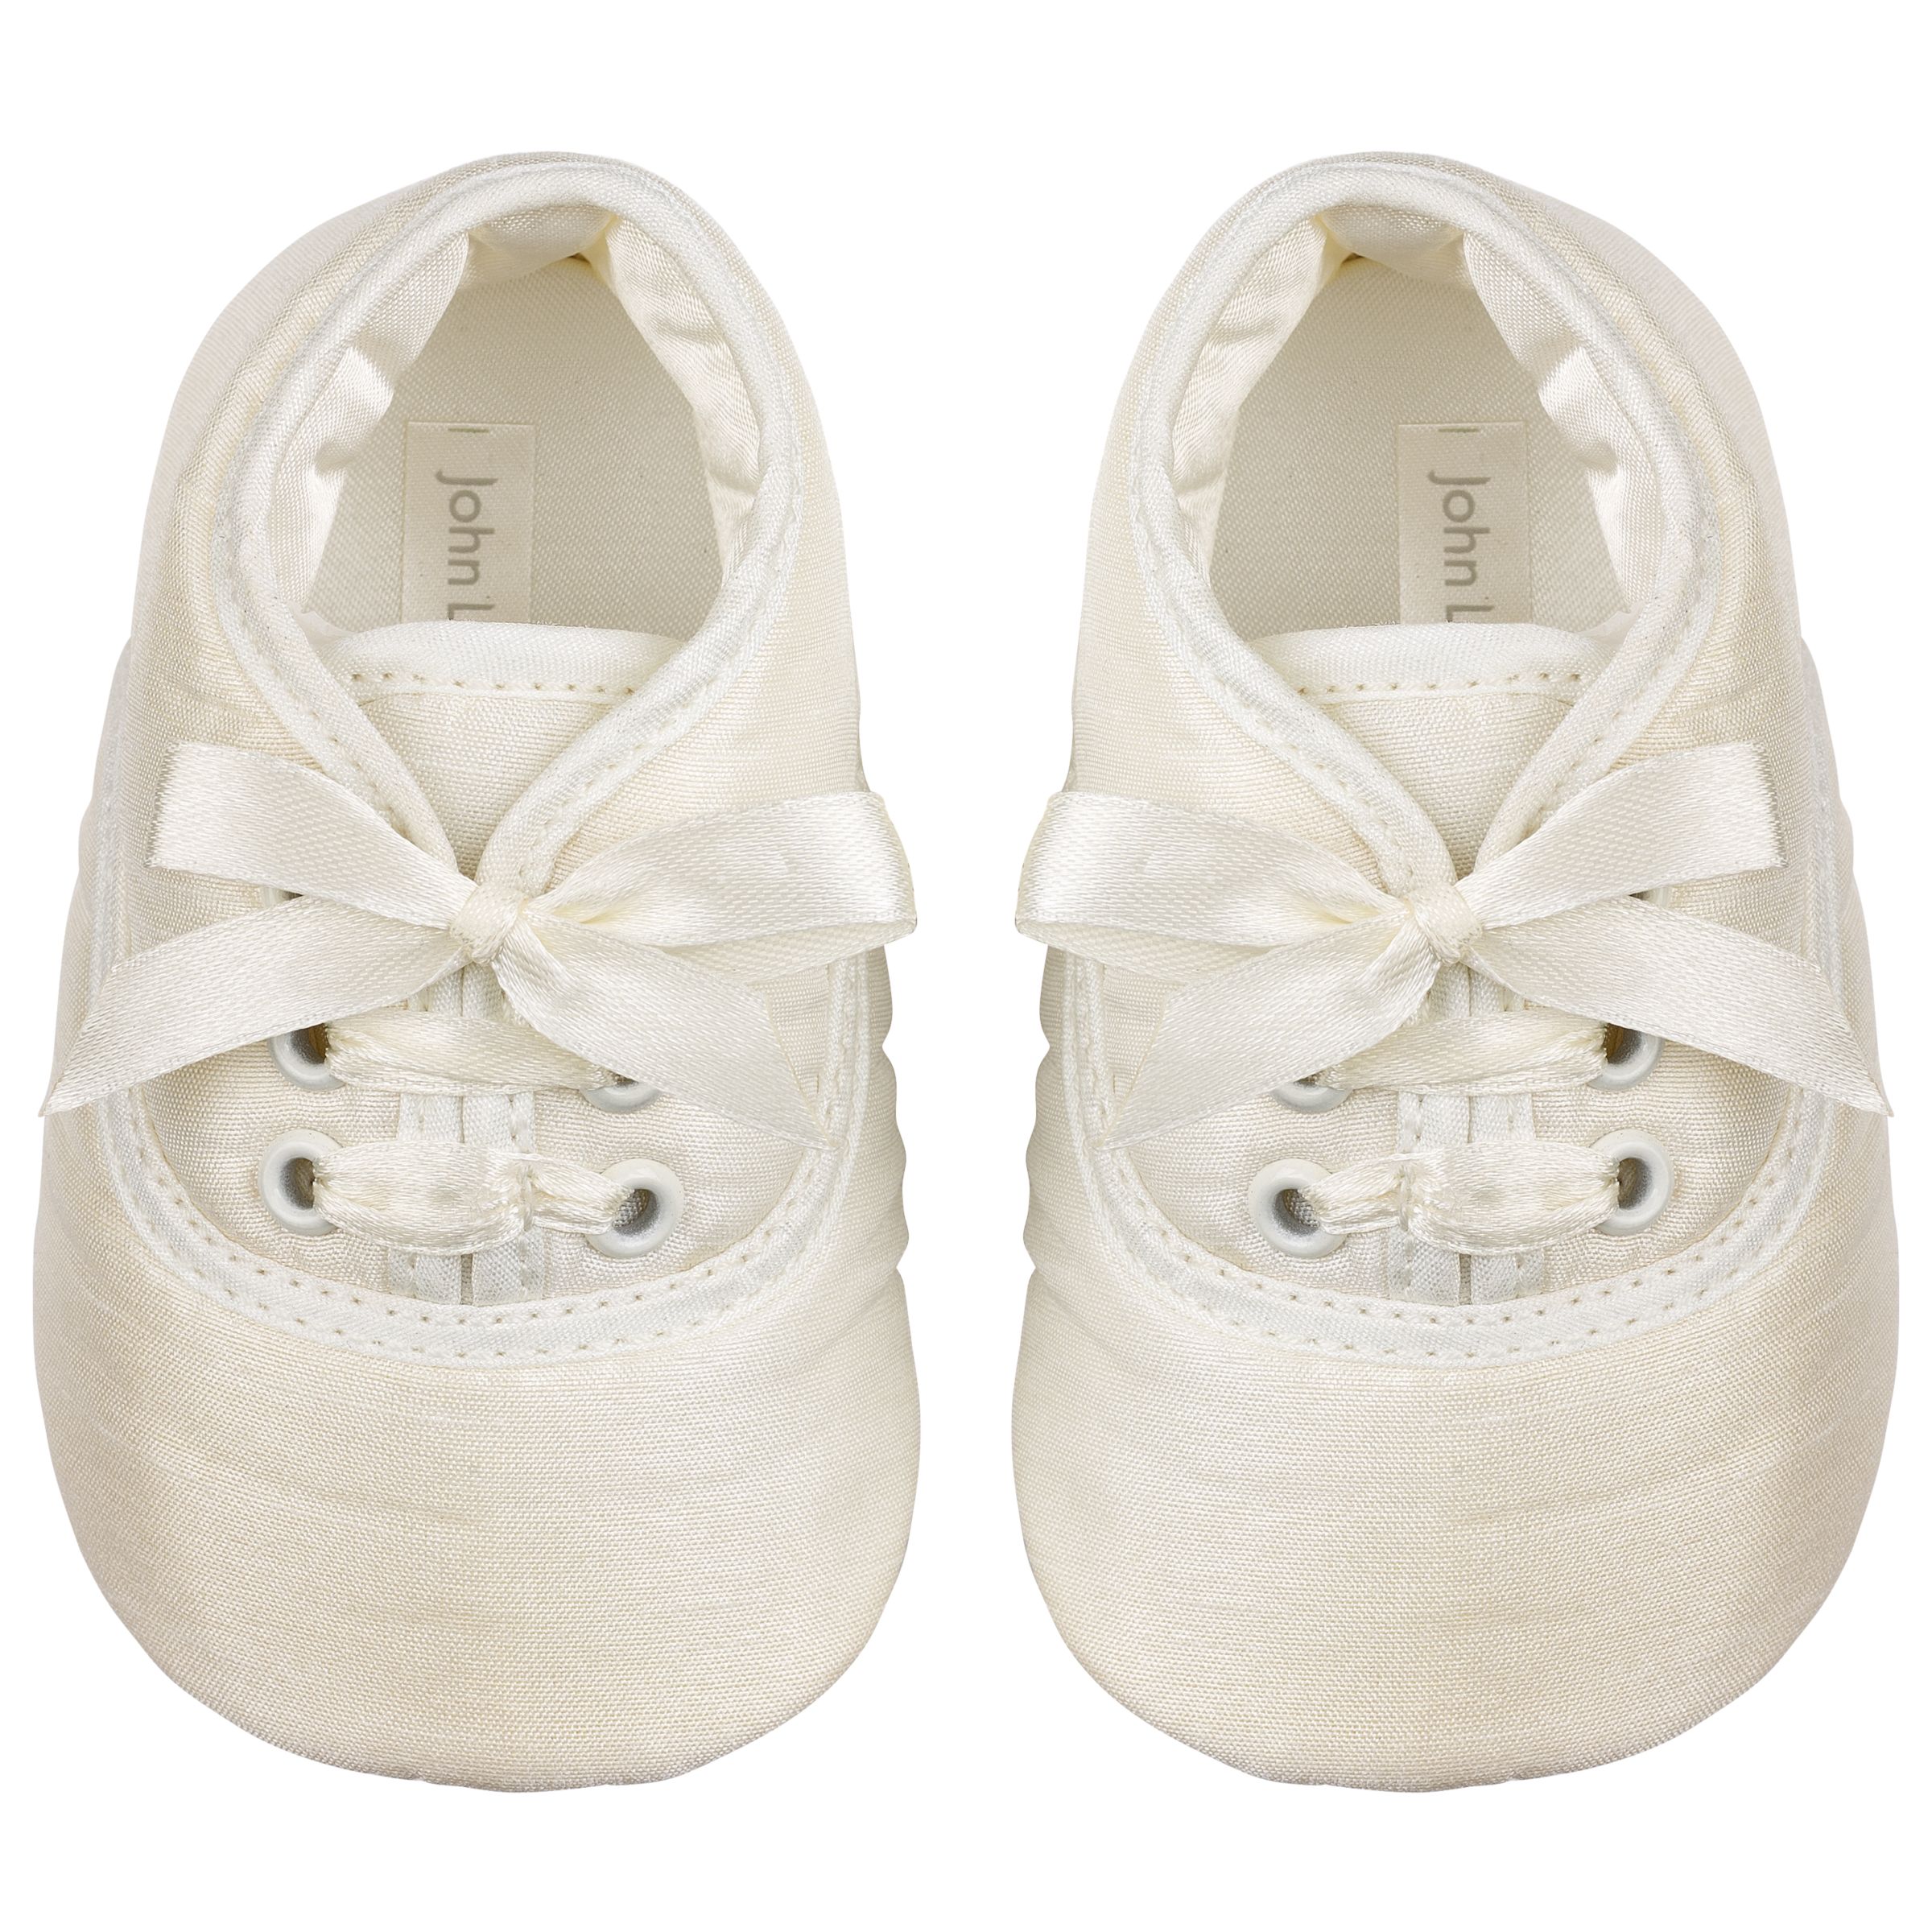 John Lewis & Partners Baby Laced Shoes, Cream